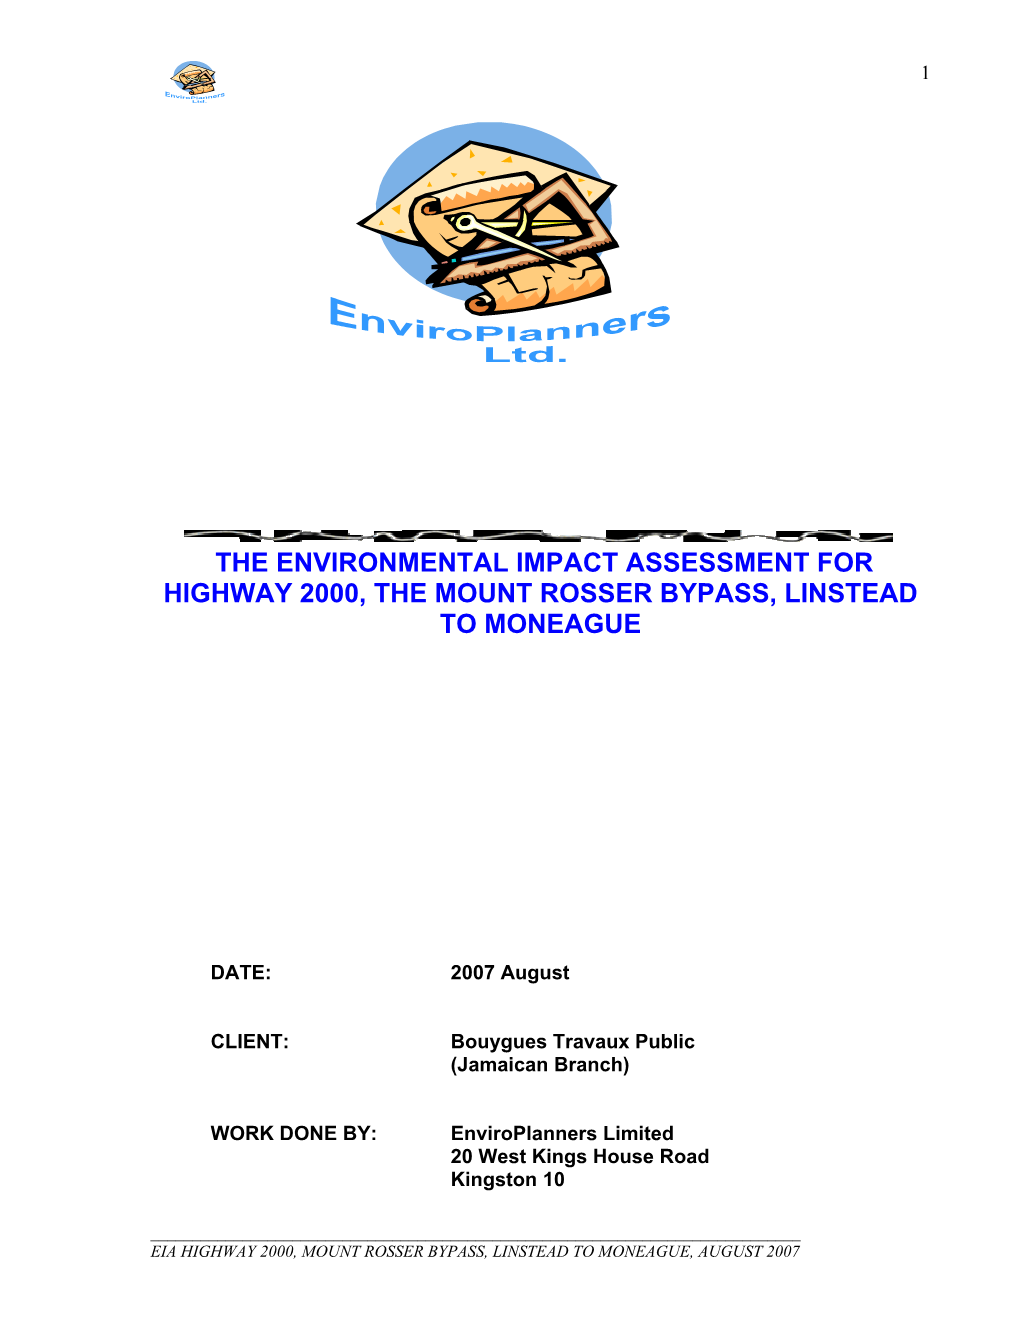 The Environmental Impact Assessment for Highway 2000, the Mount Rosser Bypass, Linstead to Moneague